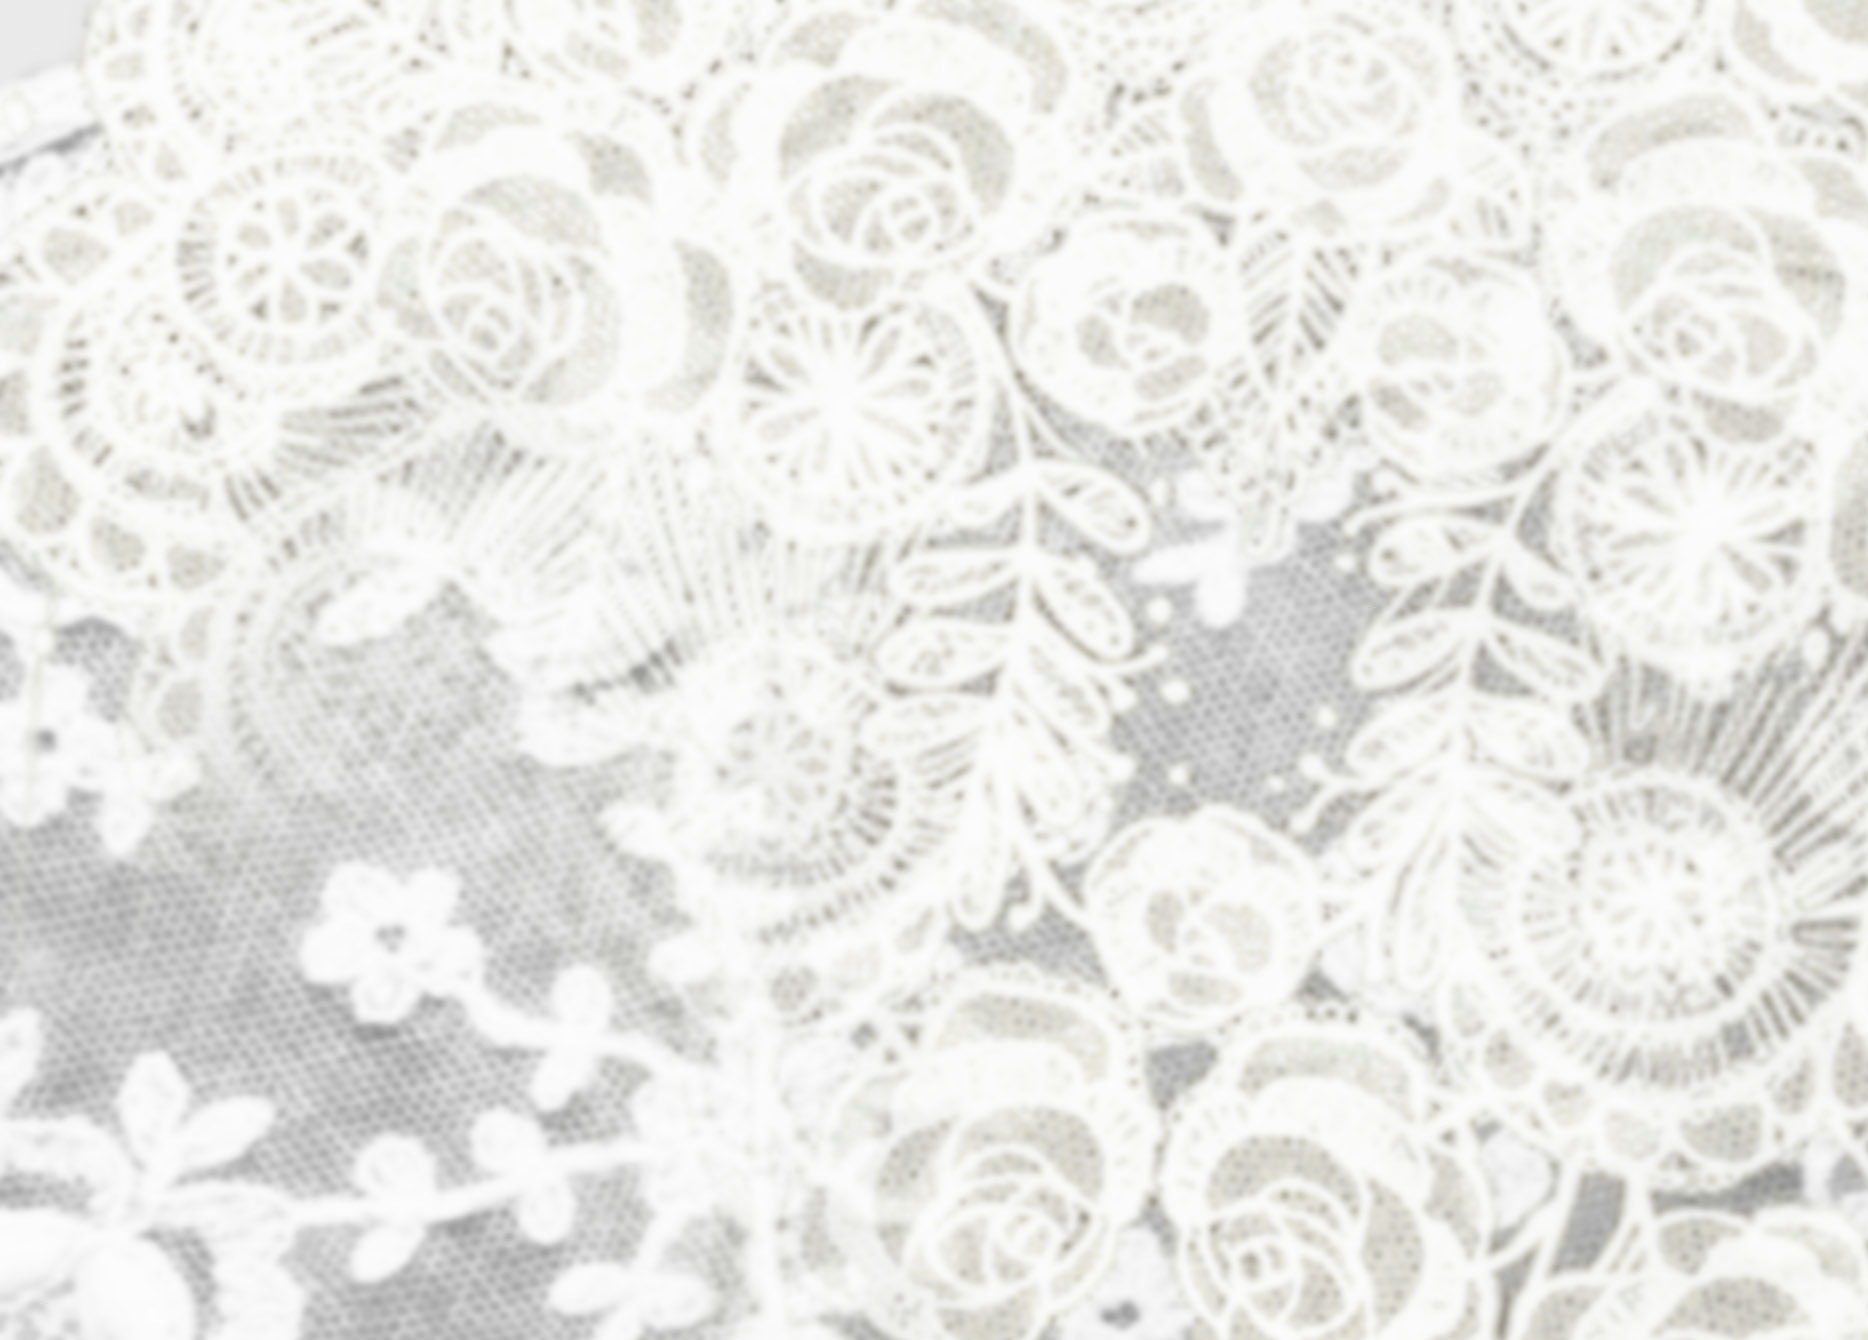 Lace wallpaper Stock Photos Royalty Free Lace wallpaper Images   Depositphotos